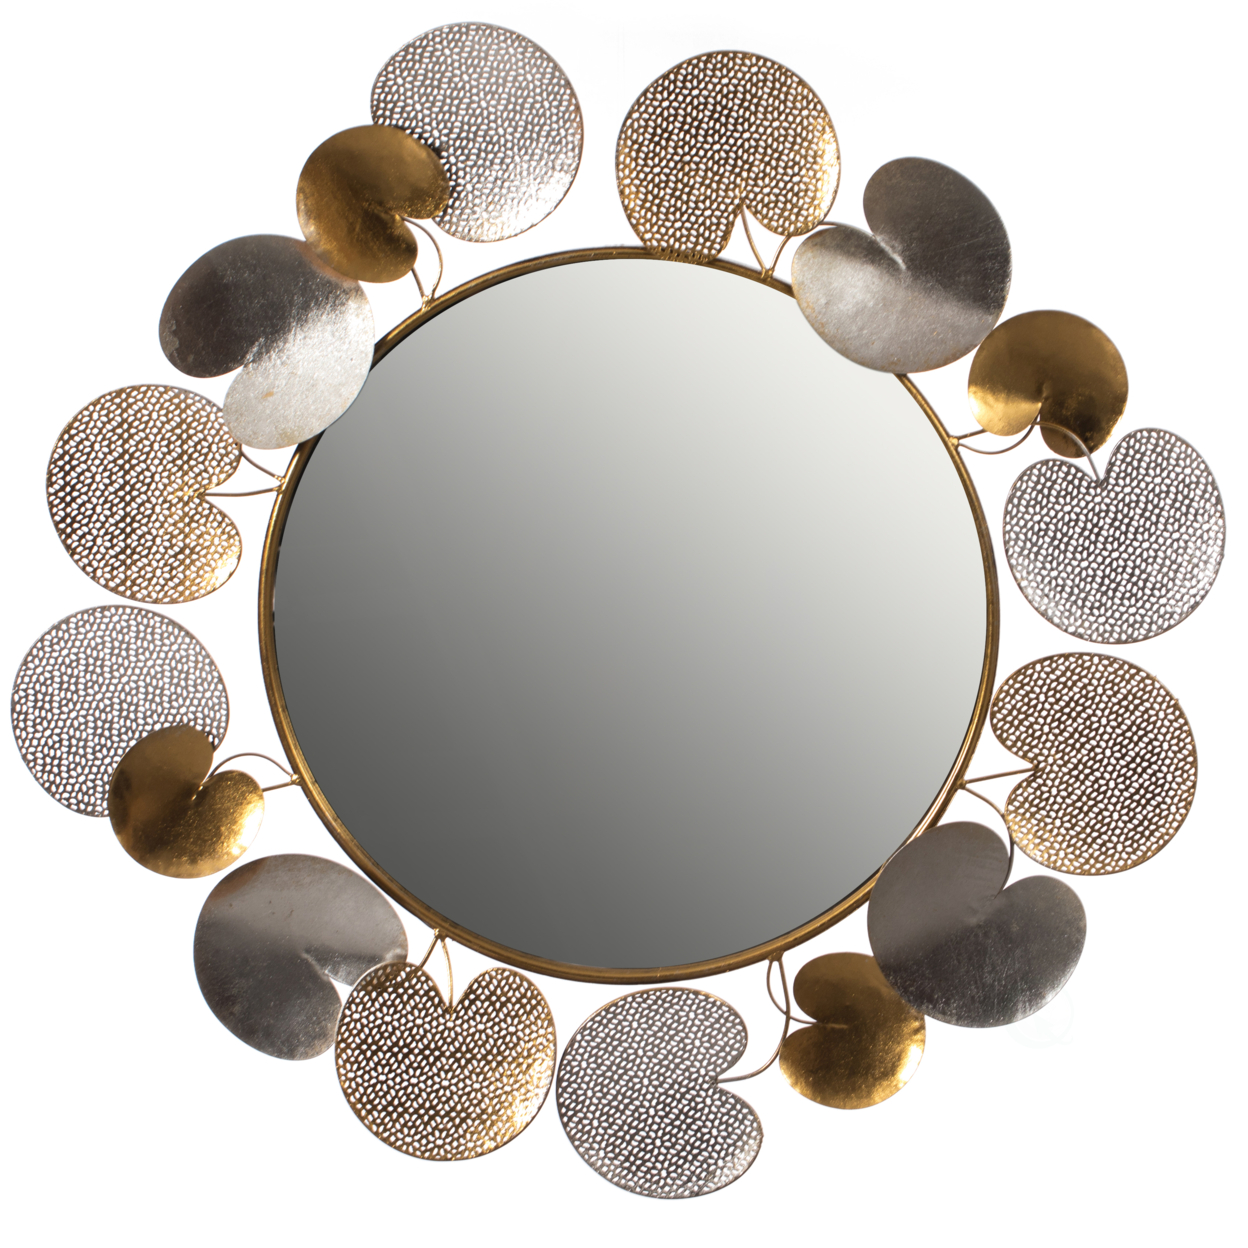 31 Accent Wall Mounted Mirror With Gold And Silver With Decorative Modern Pedal Leaf Frame